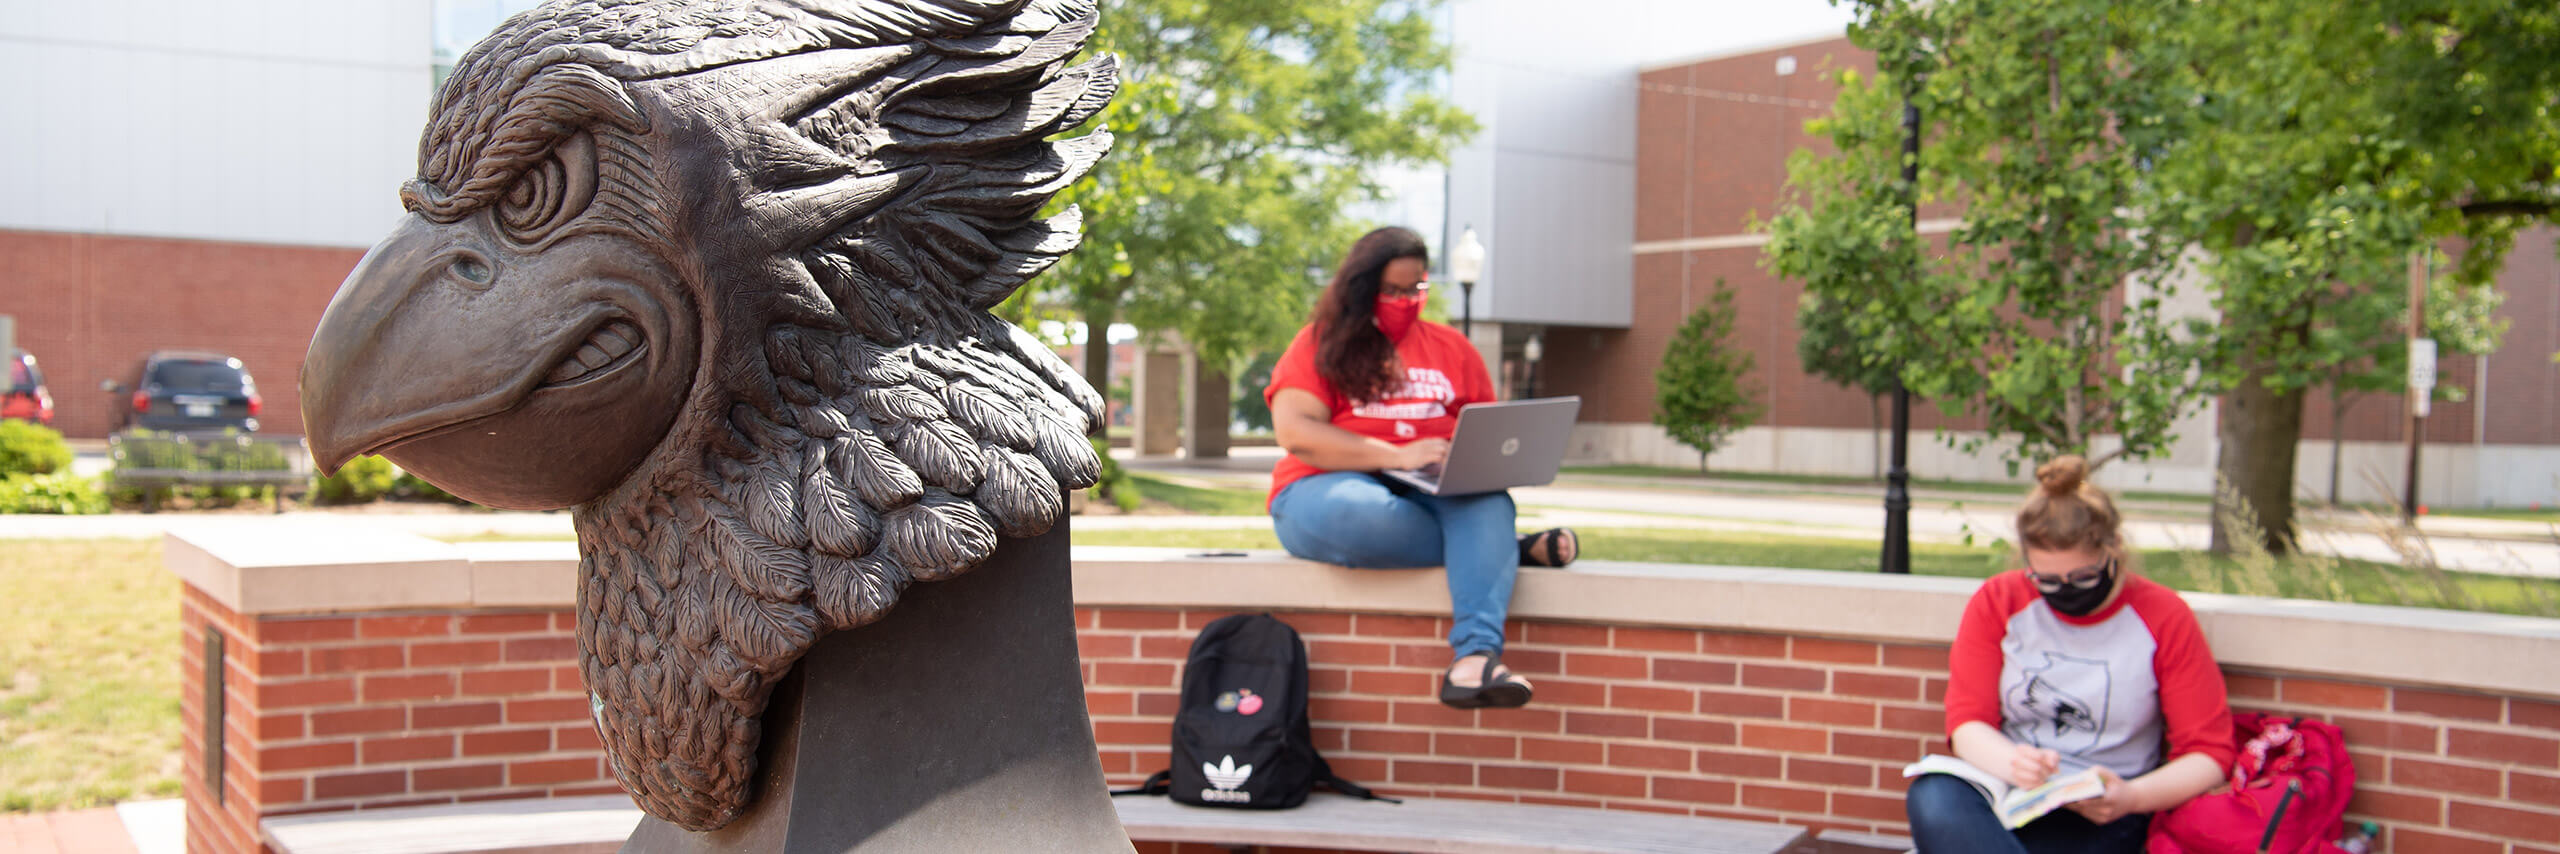 Two students sit on the bench surrounding the Reggie head statue.